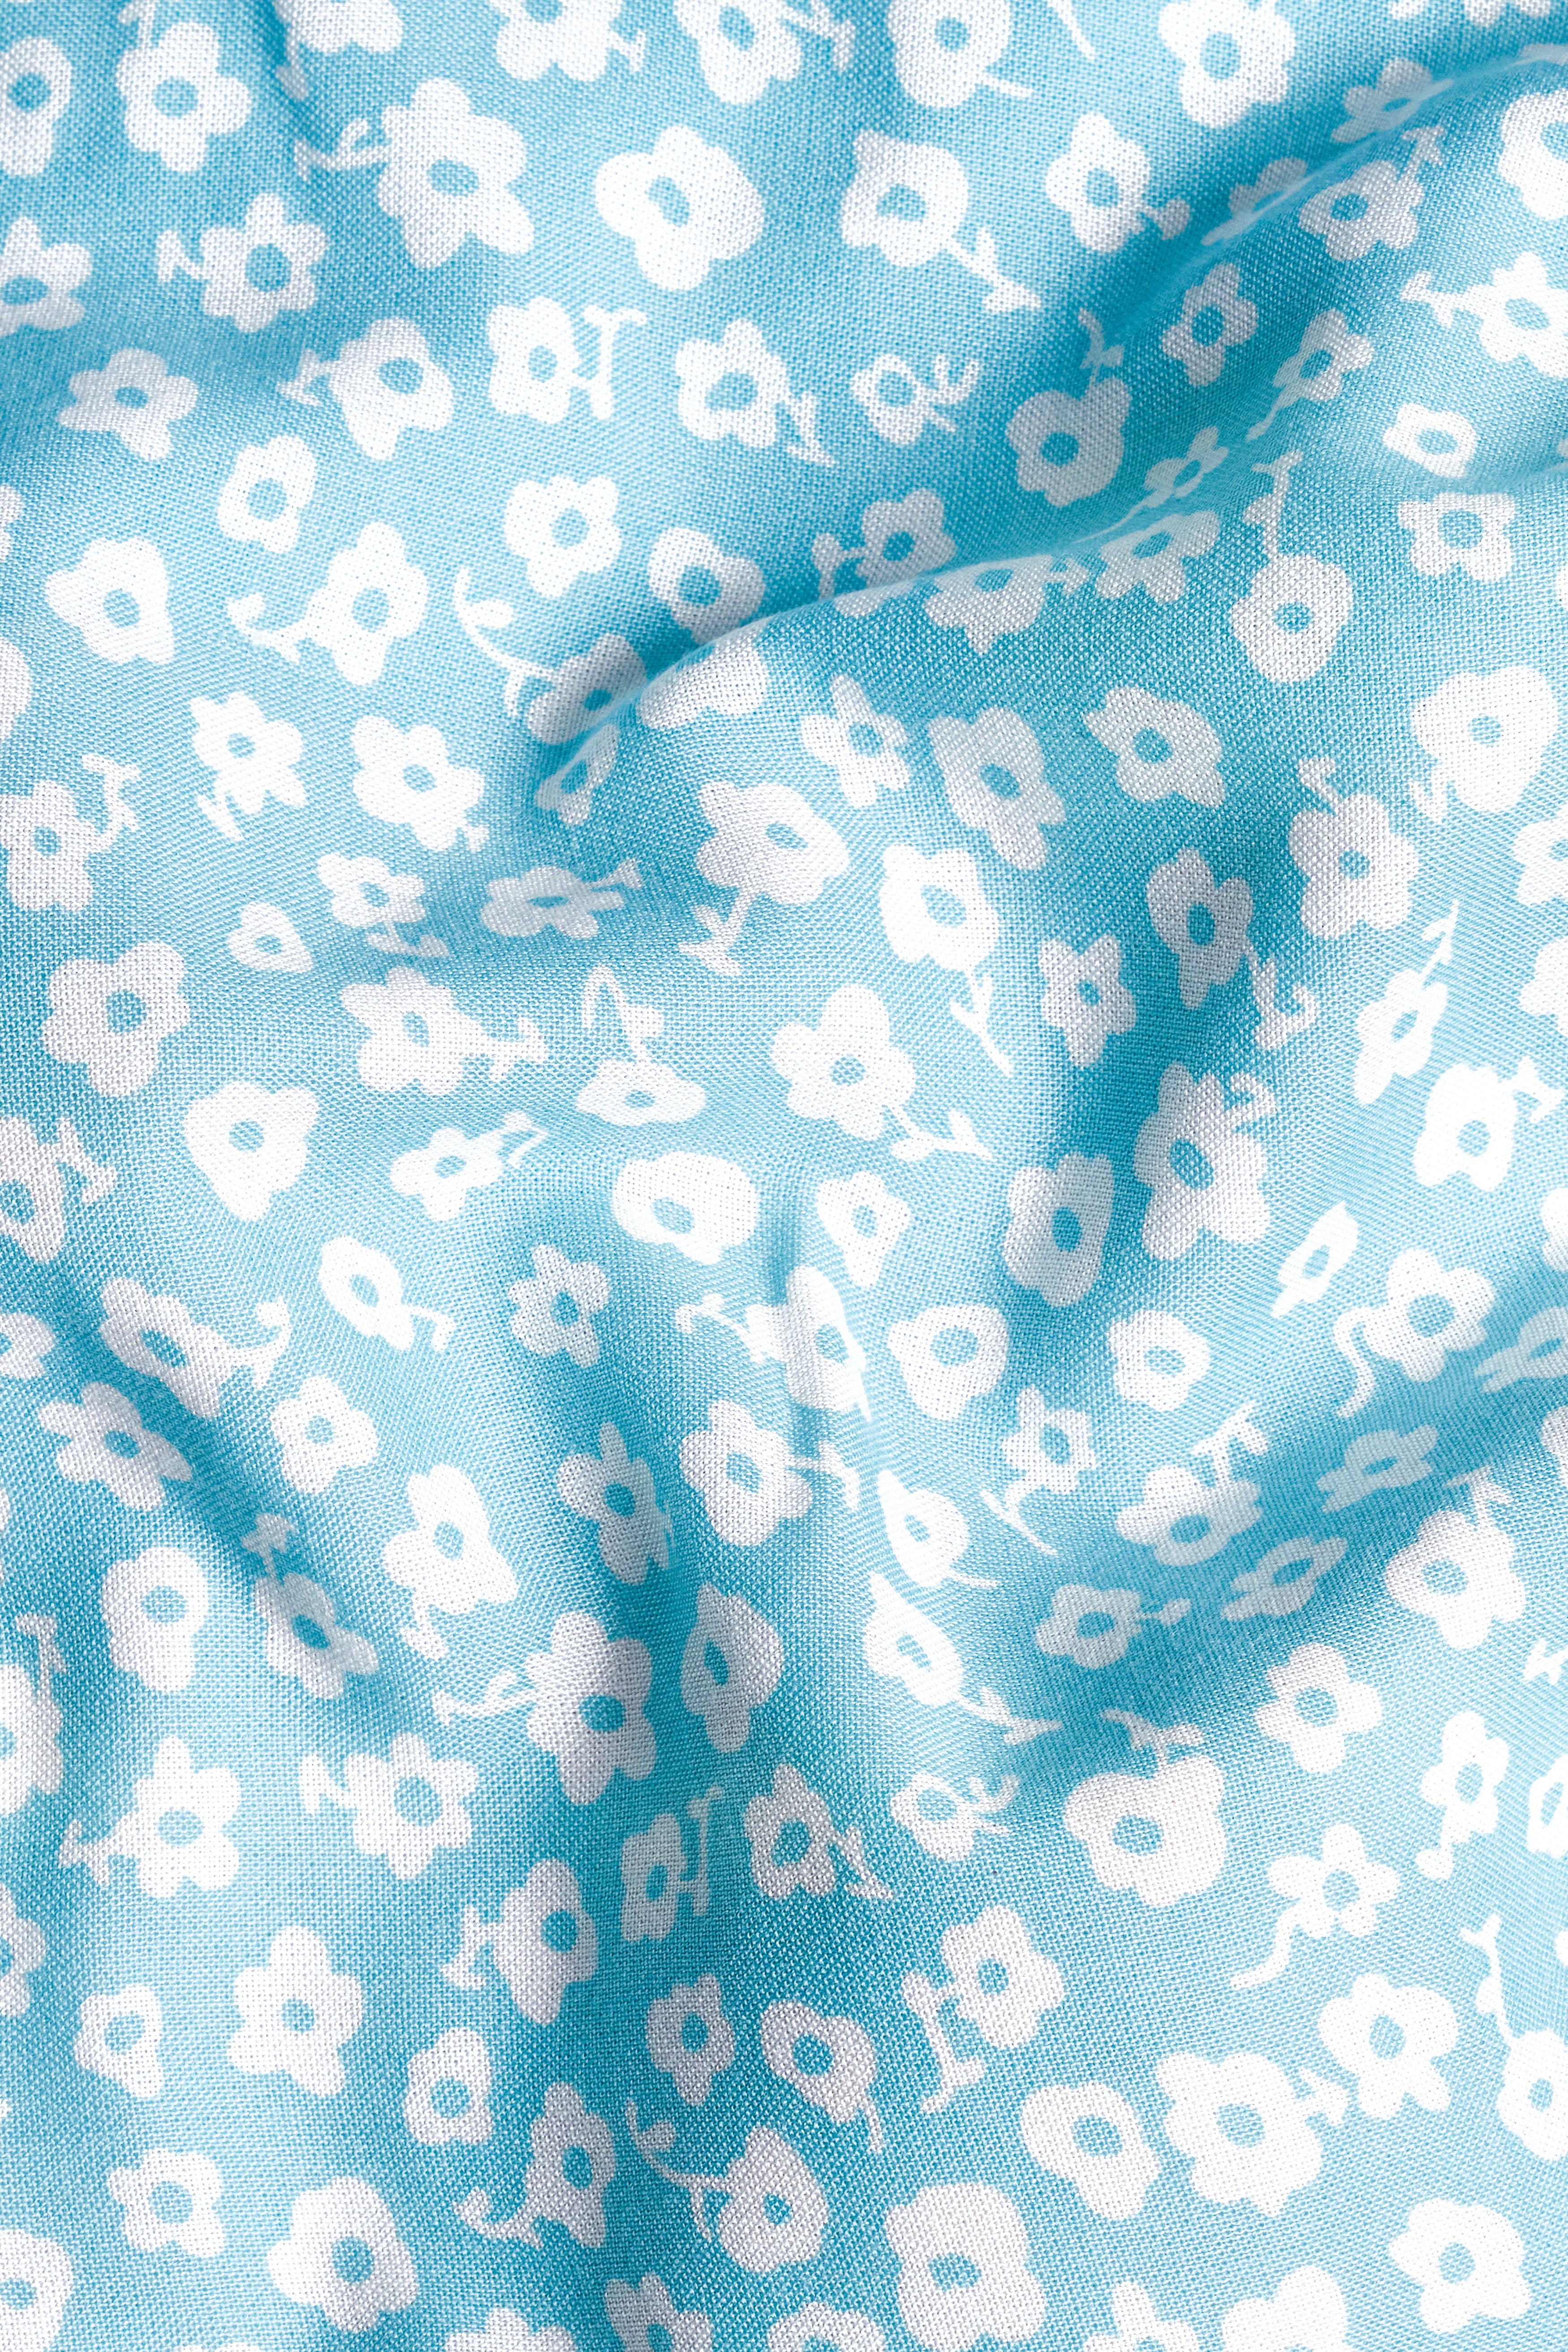 Glacier Blue With Bright White Flower Printed Premium Tencel Boxer BX547-28, BX547-30, BX547-32, BX547-34, BX547-36, BX547-38, BX547-40, BX547-42, BX547-44